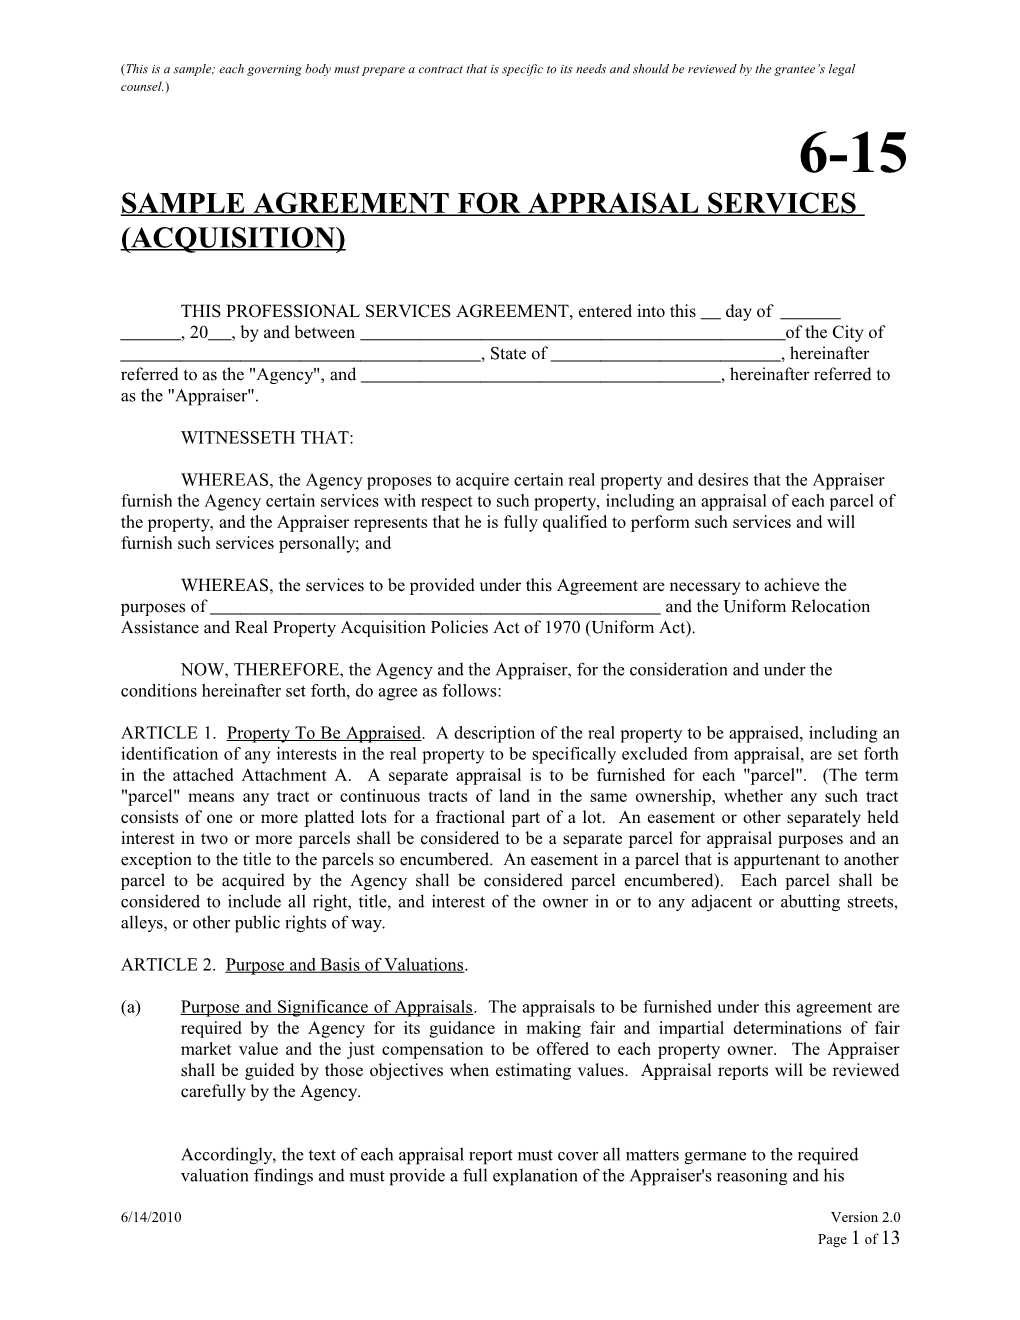 Sample Agreement for Appraisal Services (Acquisition)